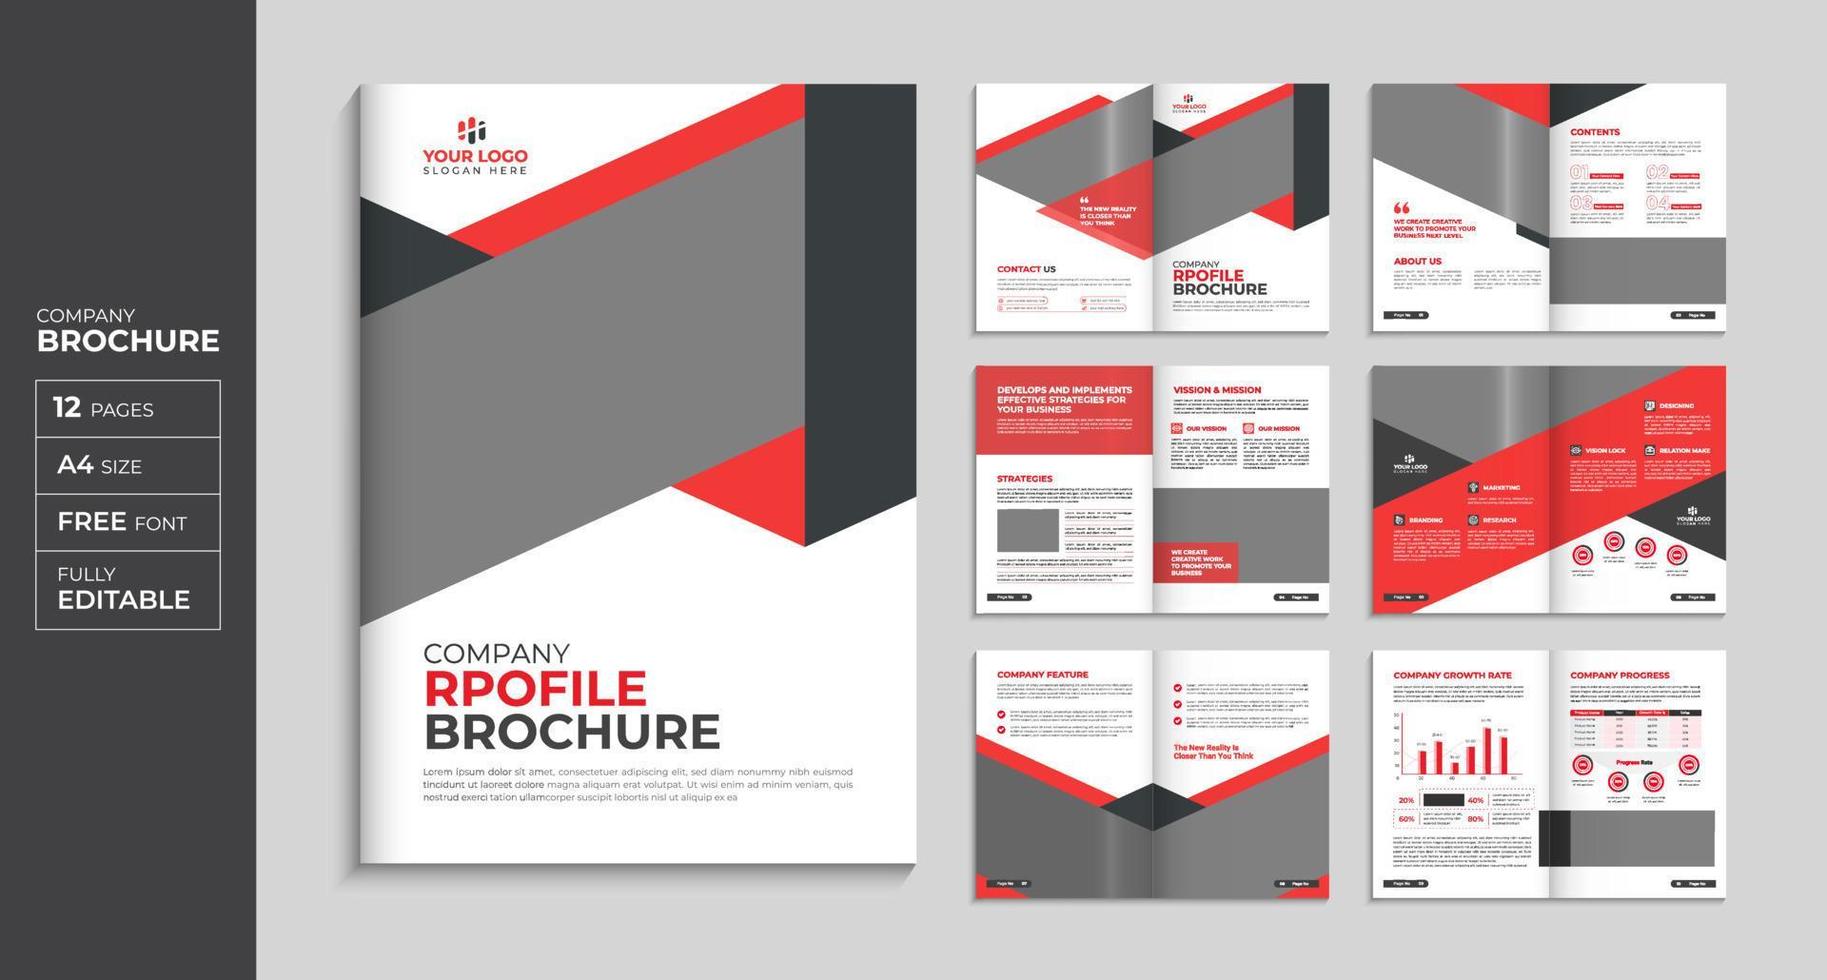 Red corporate brochure company profile template annual report cover layout, minimal business brochure vector